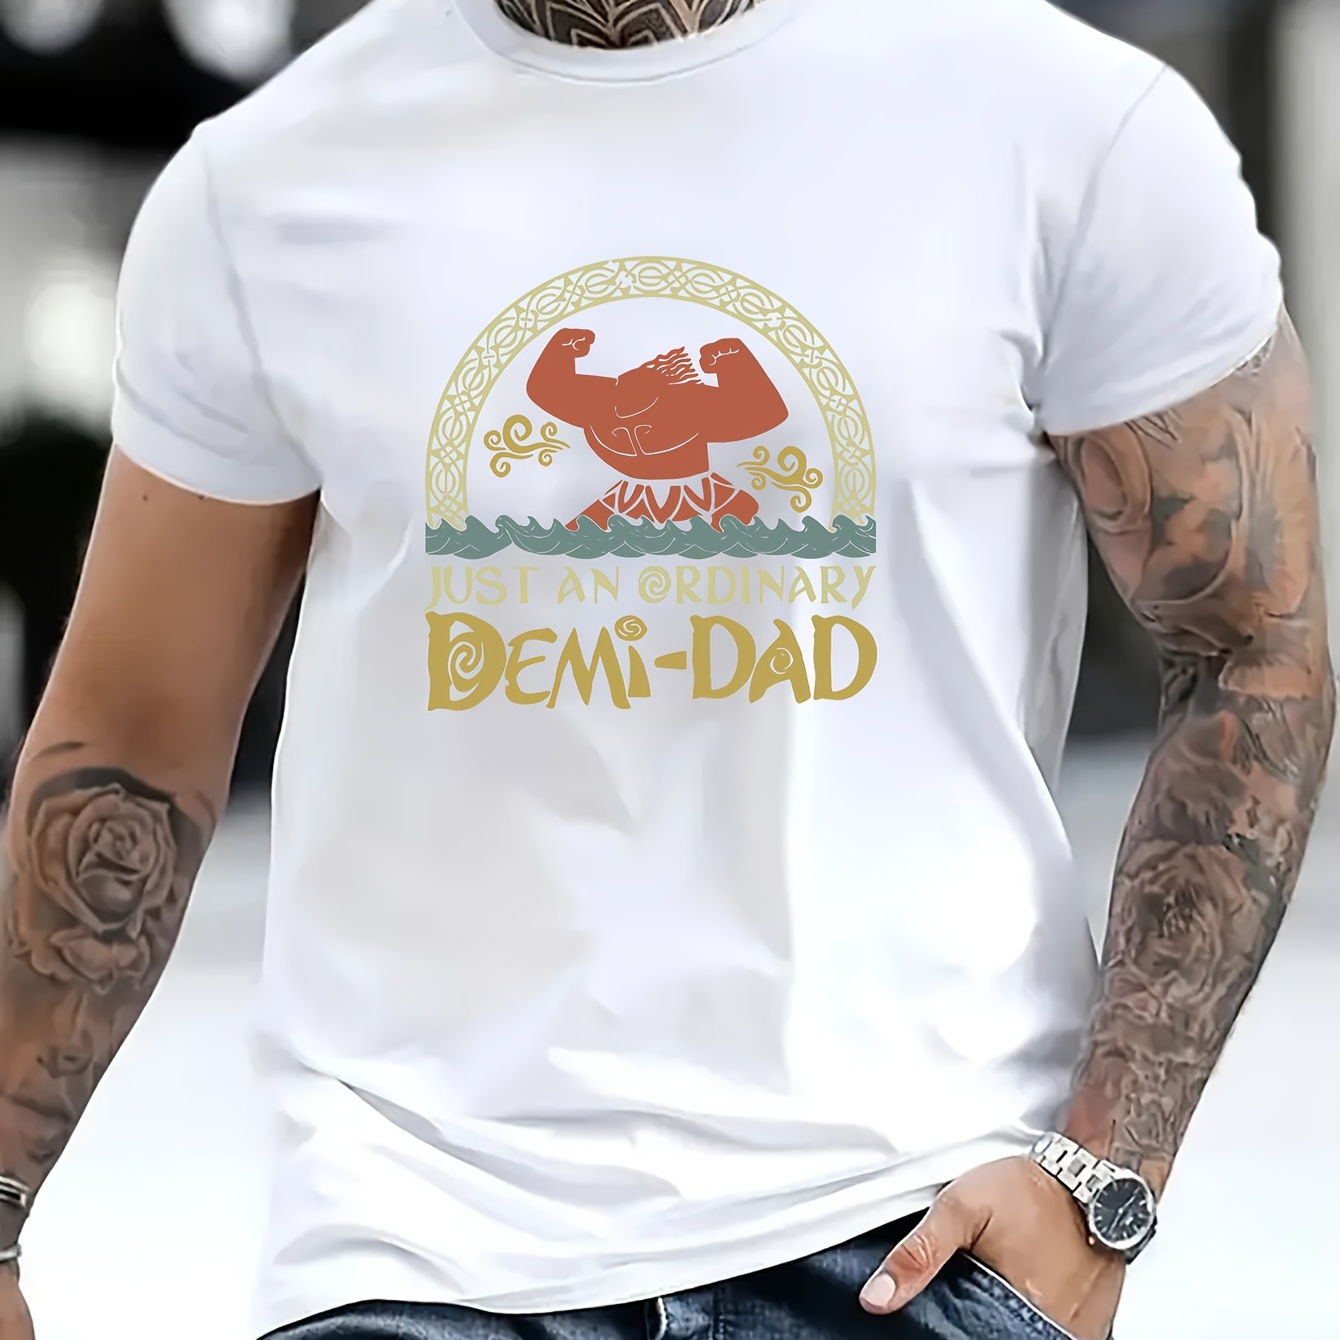 

Just An Ordinary Demi Dad Letter & Graphic Print Men's Casual & Comfortable Crew Neck Short Sleeve T-shirt, Suitable For Summer Outdoor Activities